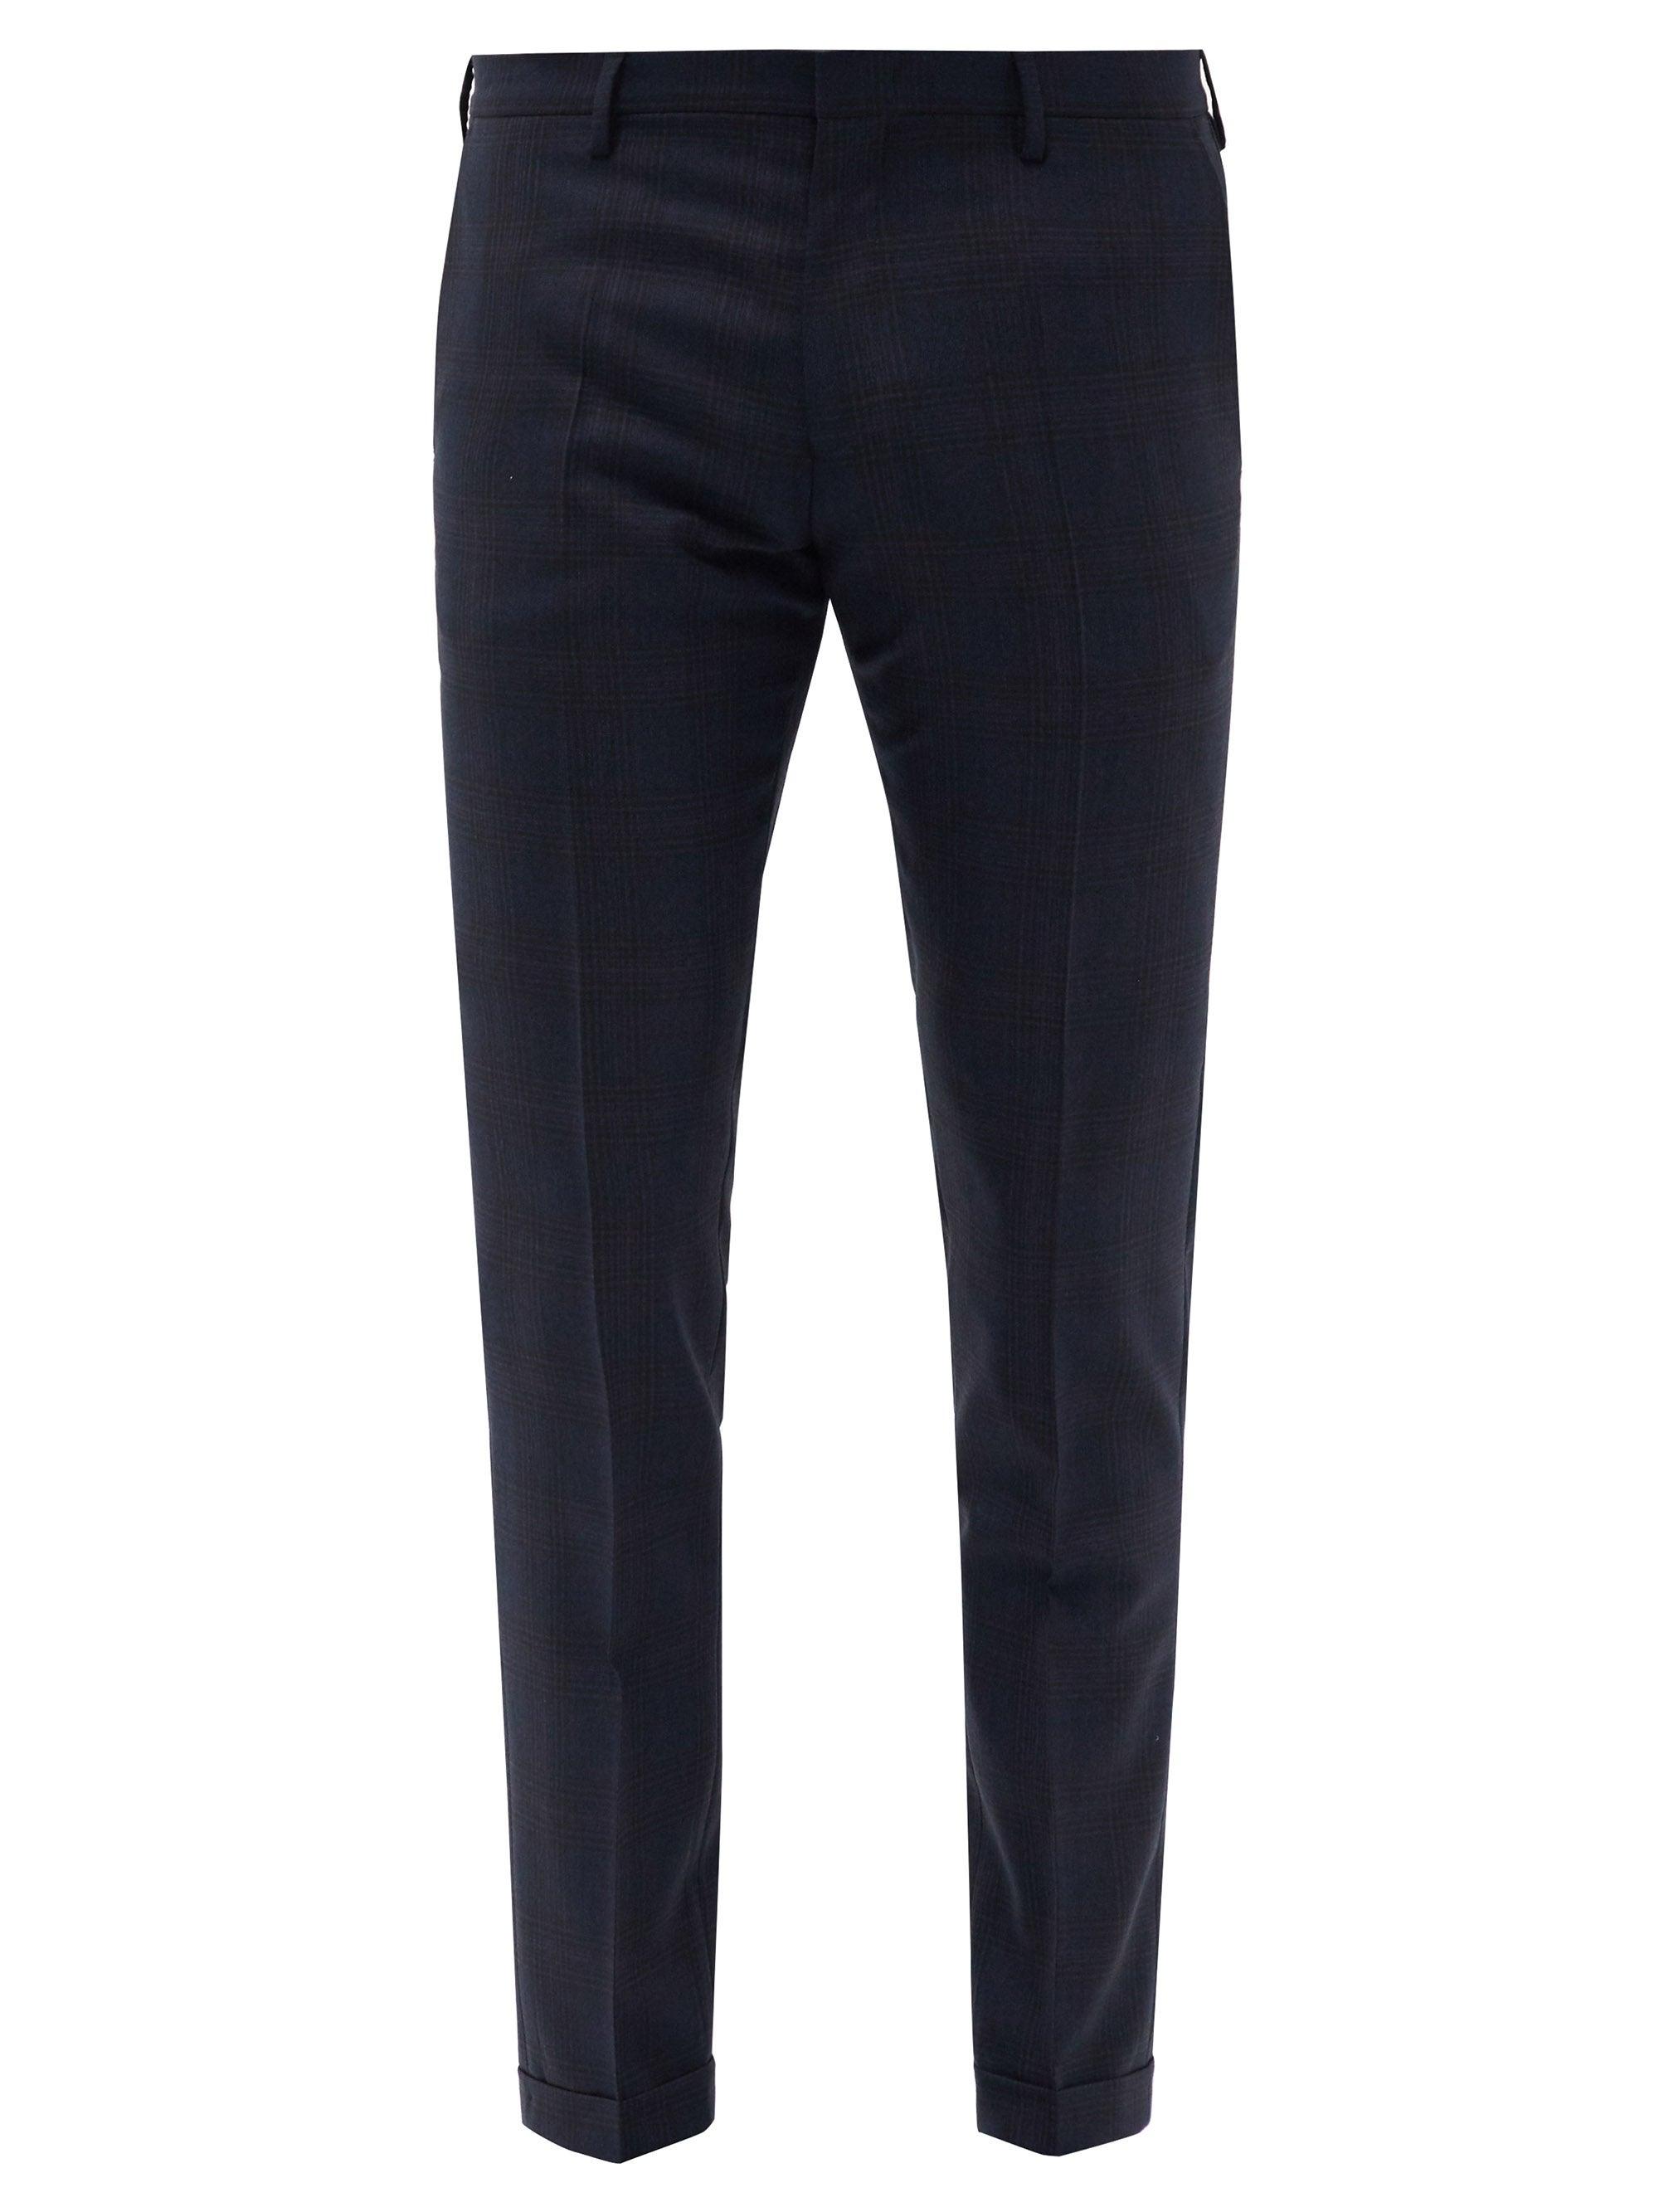 Paul Smith Check Wool Suit Trousers in Navy (Blue) for Men - Lyst